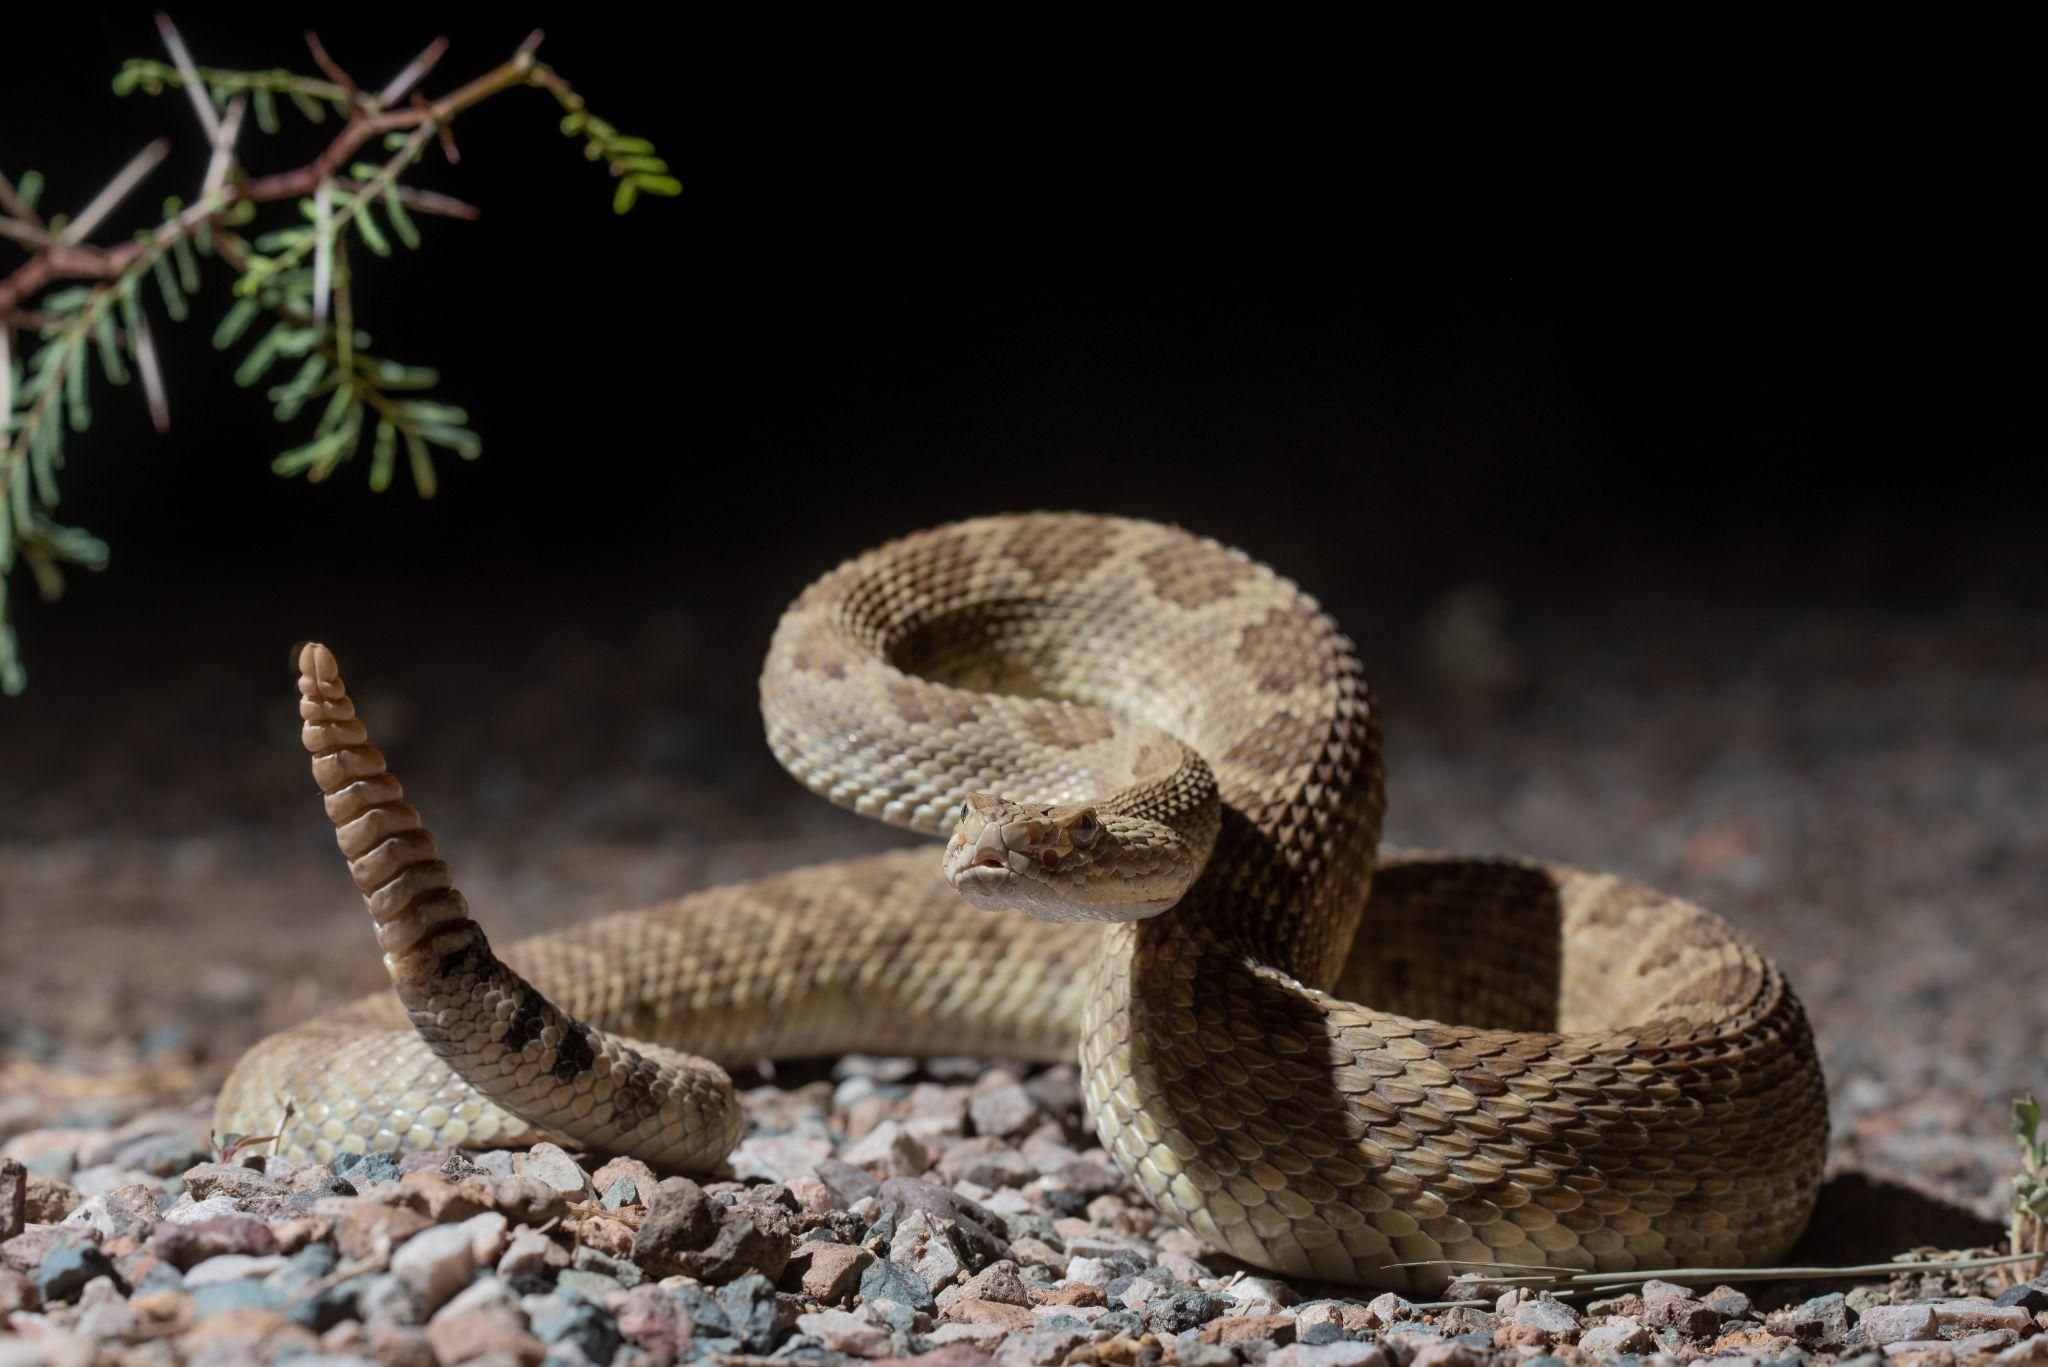 Mojave rattlesnakes have a fearsome reputation due to their tendency to quickly take a defensive posture, but like any rattlesnake, they just want to be left alone; the safest option for both snakes and people. 